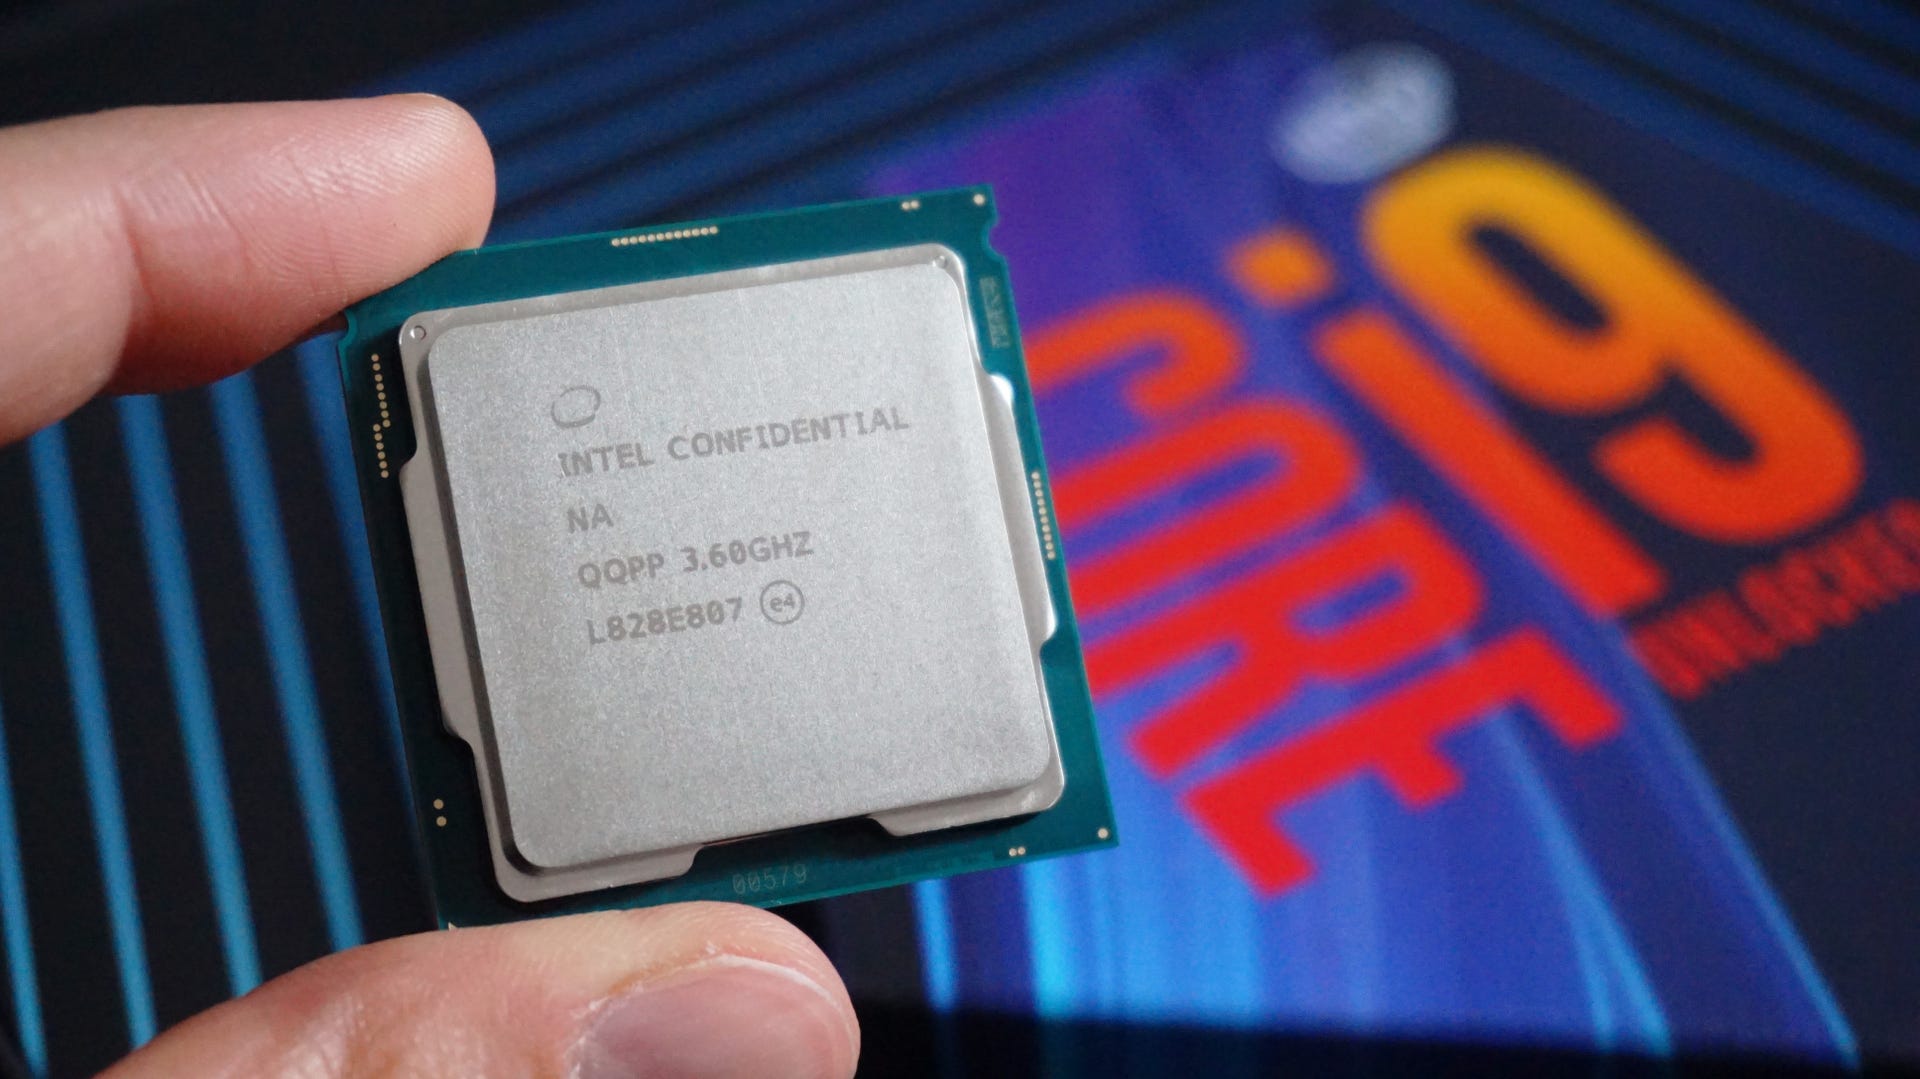 ga sightseeing nicotine Bespreken Intel Core i9-9900K review: The fastest gaming CPU has arrived, but good  grief the price | Rock Paper Shotgun